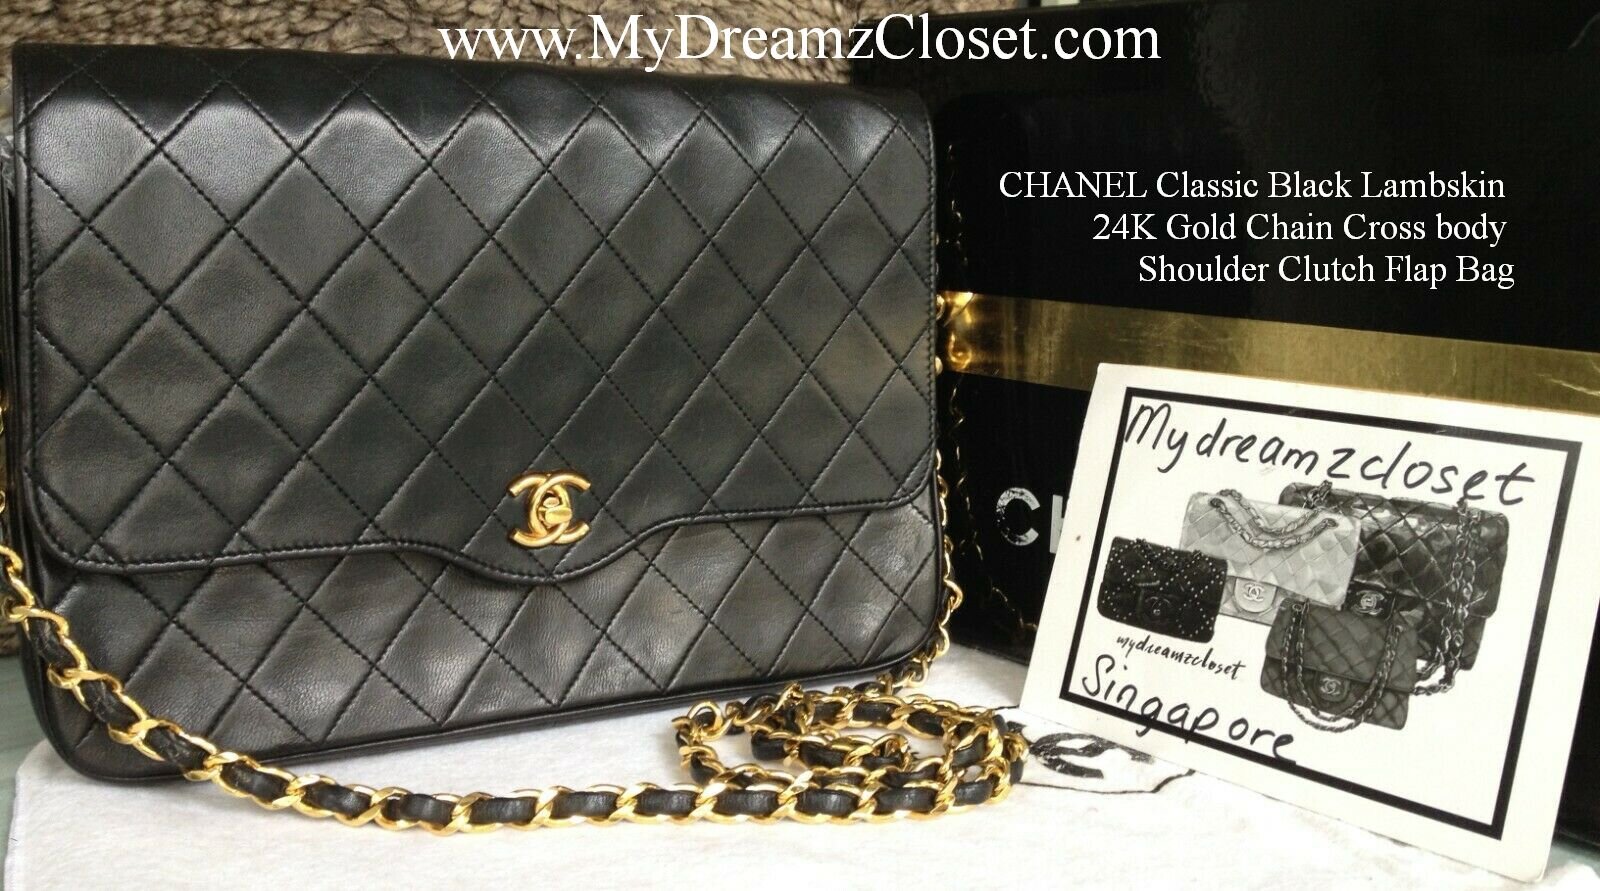 1996 Chanel Bag - 99 For Sale on 1stDibs  chanel 1996 bag collection,  chanel double flap black quilted lambskin small classic gold hardware,  1996-1997, chanel vintage 1996